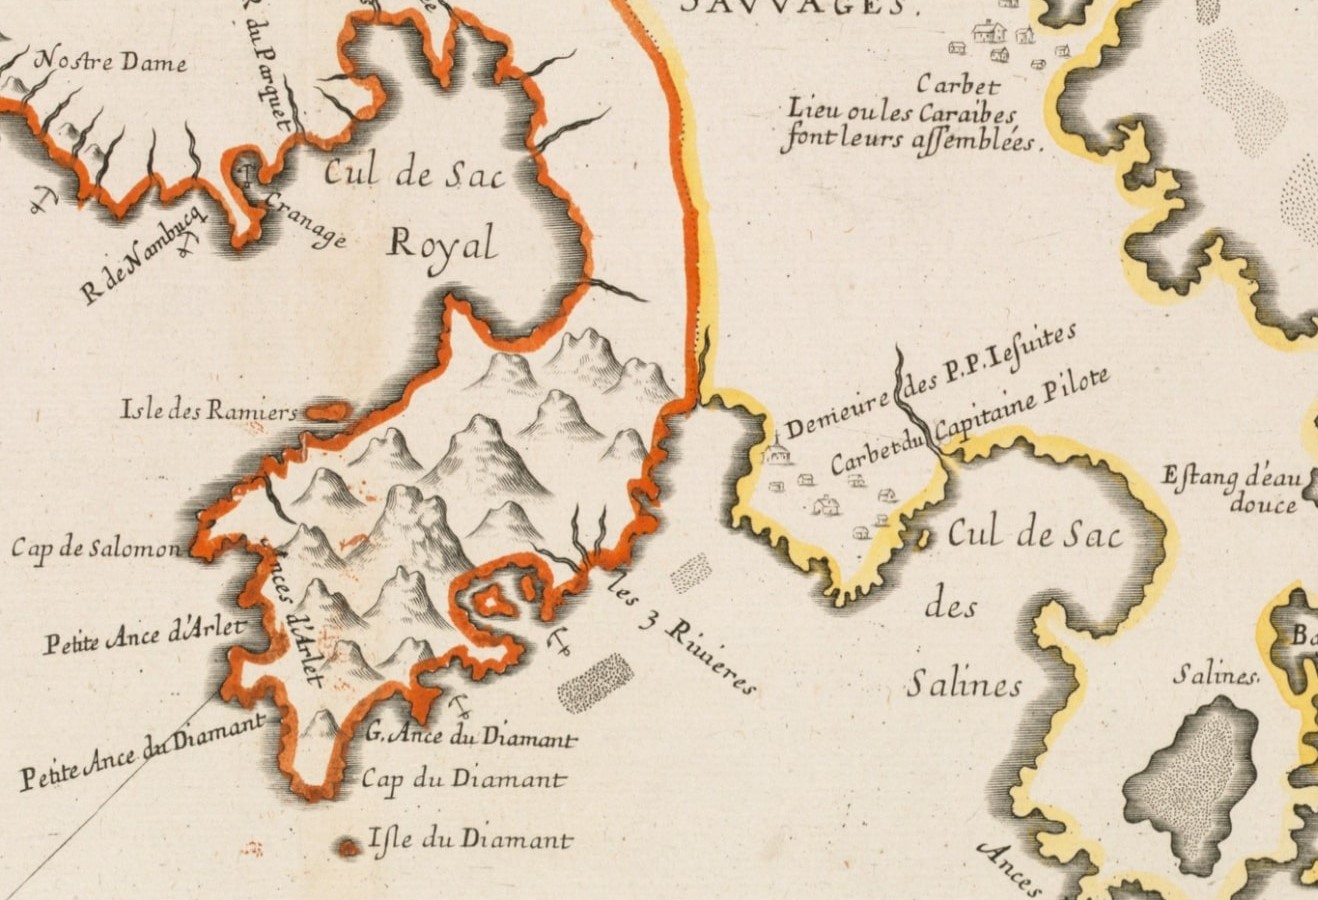 This close look at the map of Martinique shows a coastline labelled with French names.